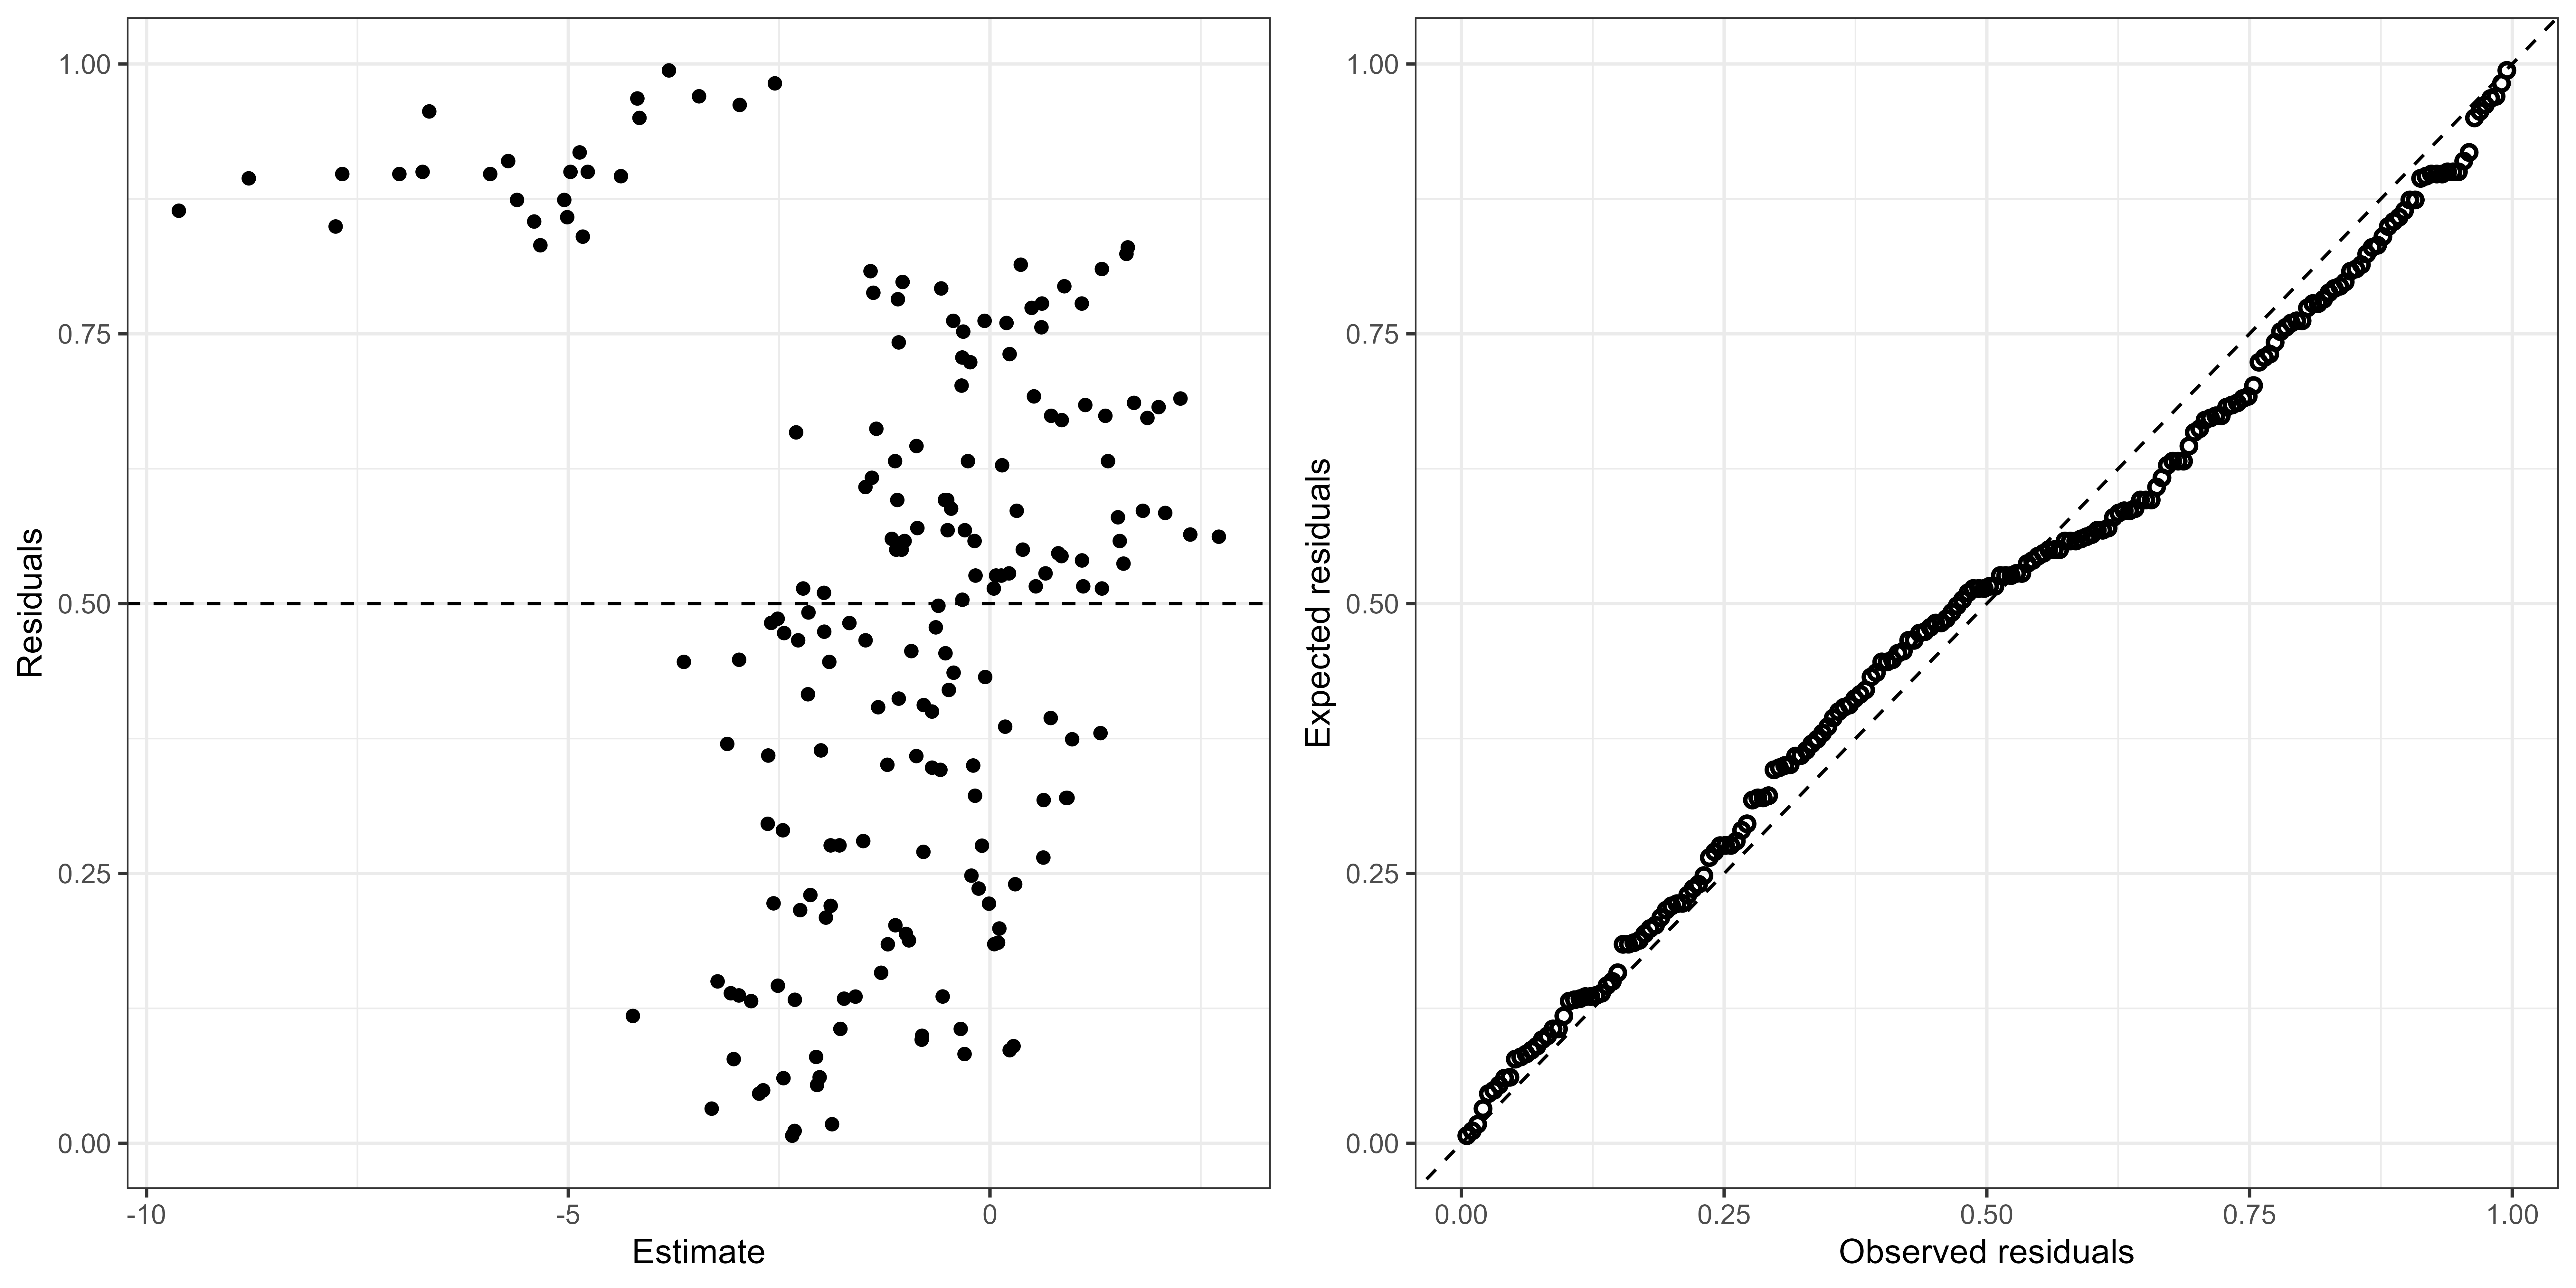 Model validation of GAMM including weighted dredge and video data as response, showing simulated residuals vs. estimates and QQ-plot of simualted residuals.